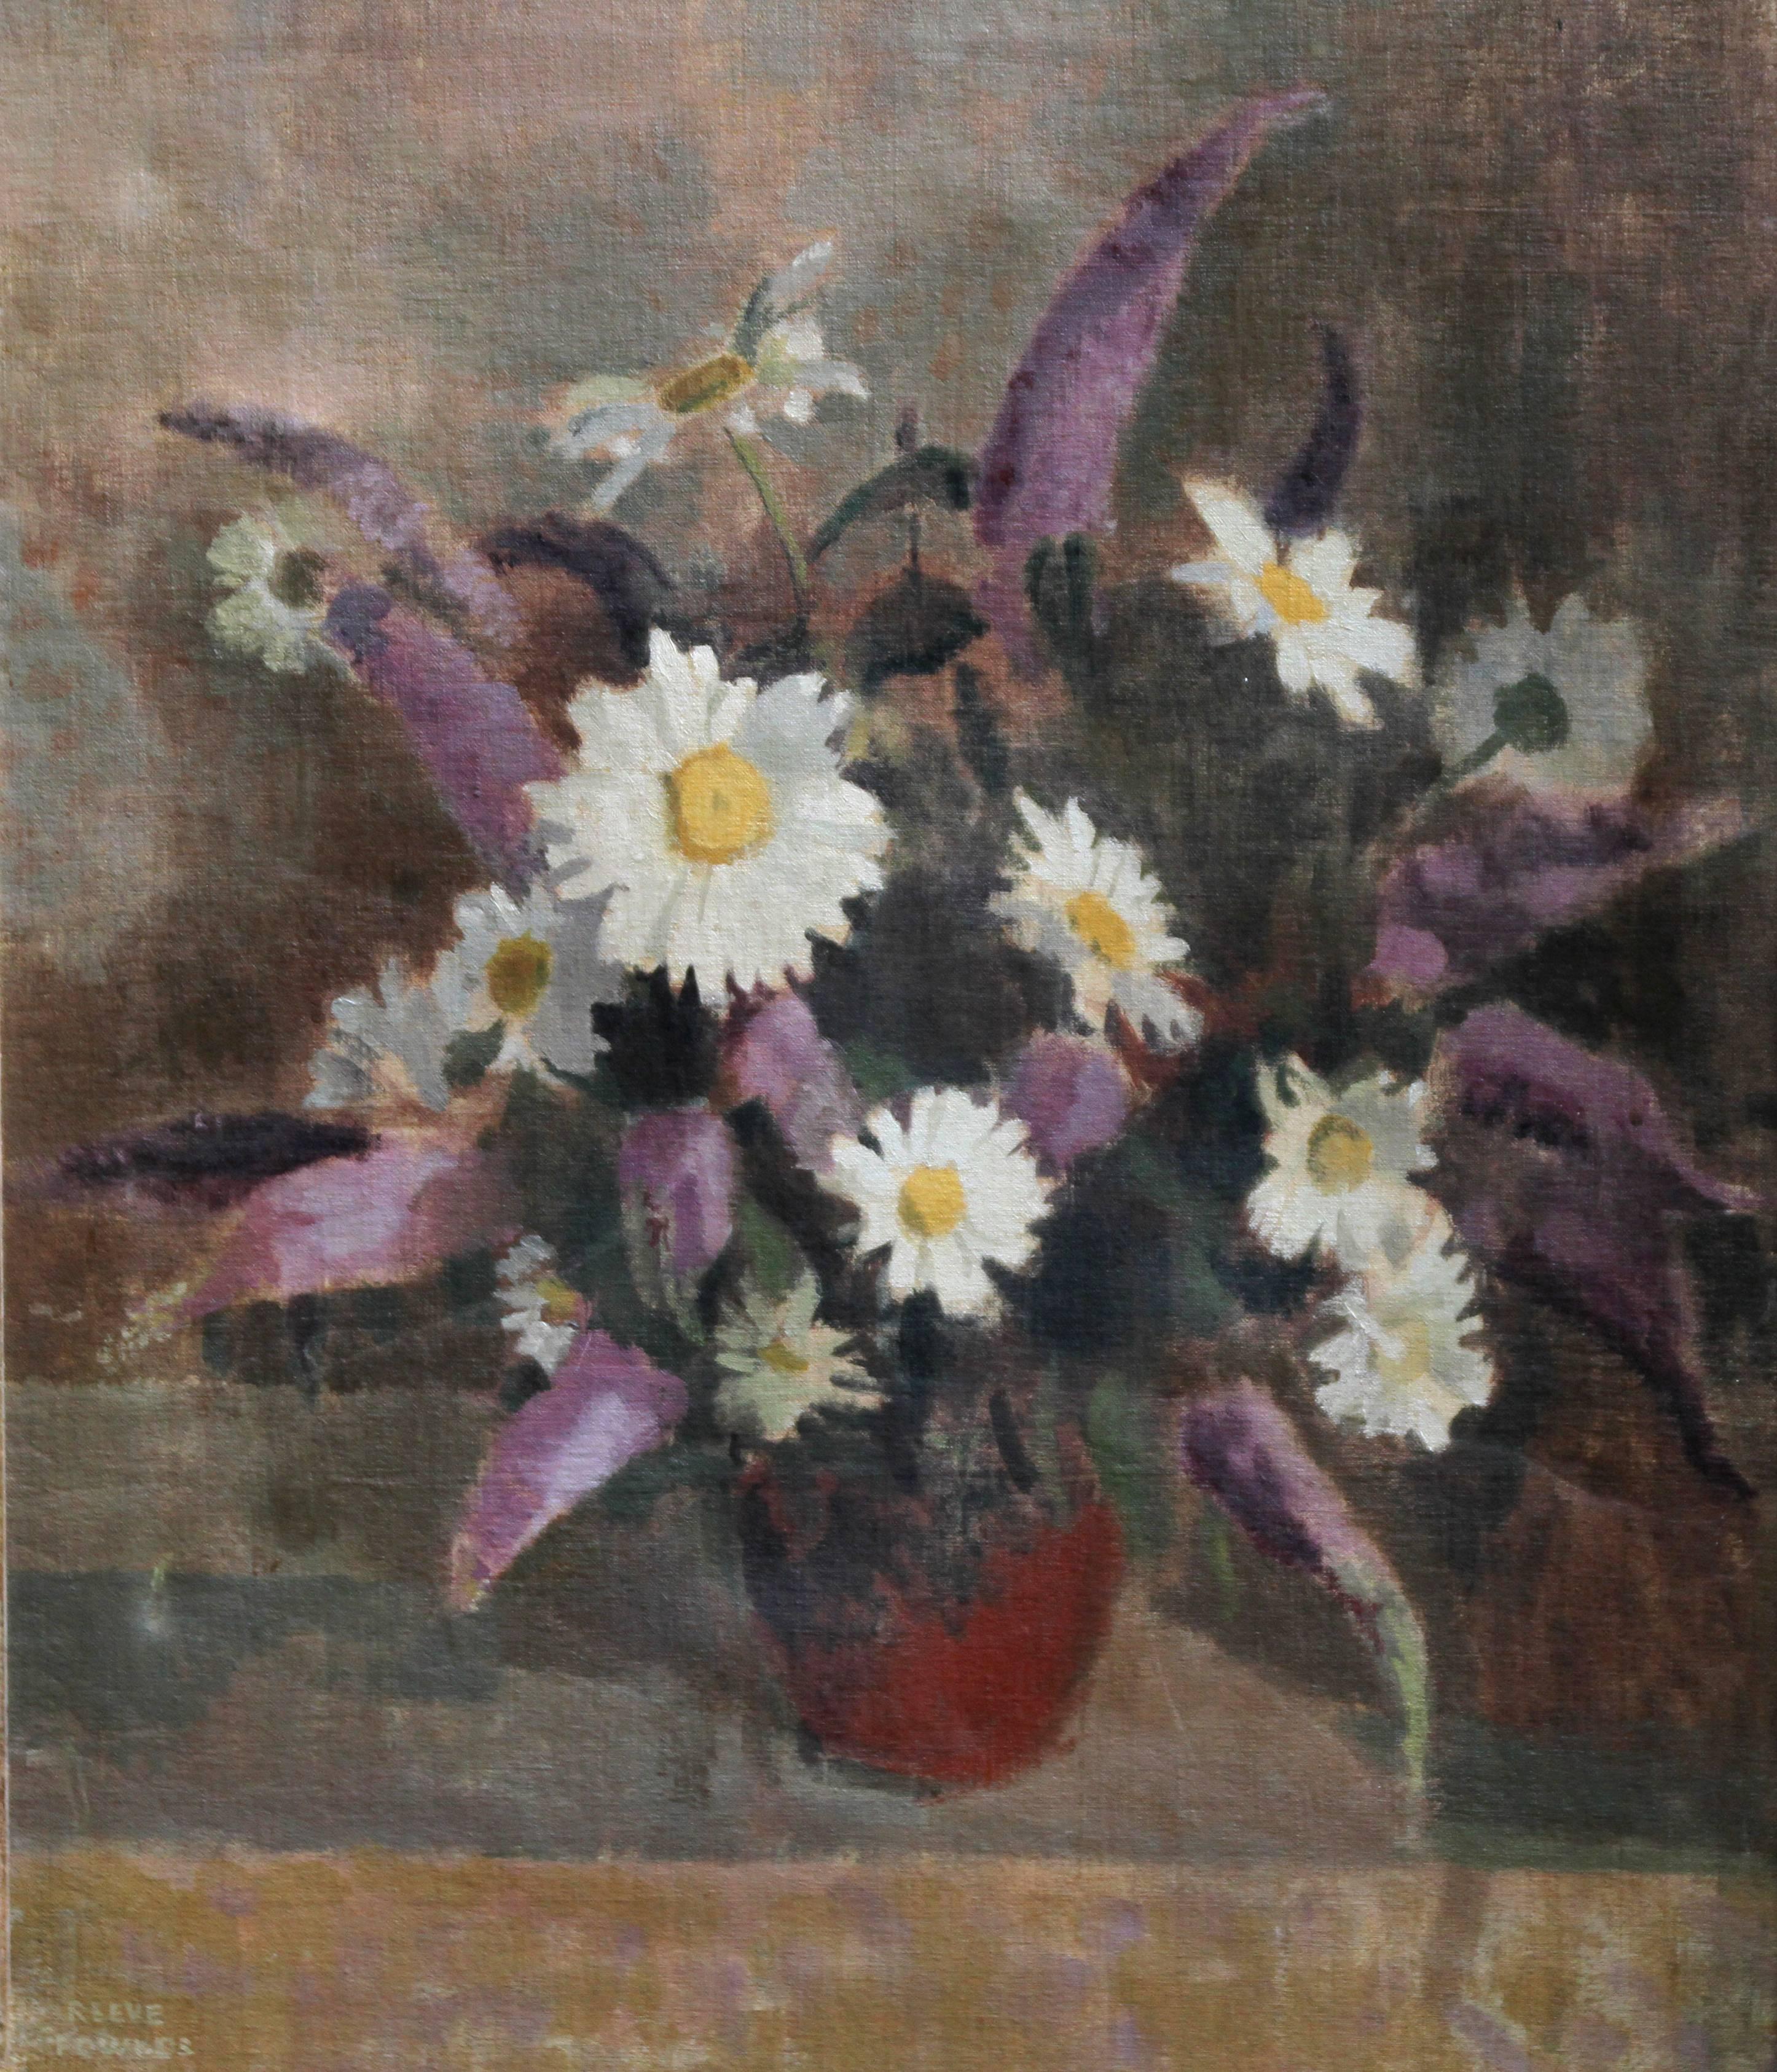 Daisies - British Impressionist art 1940s still life floral oil painting flowers - Painting by Amy Reeve Fowlkes